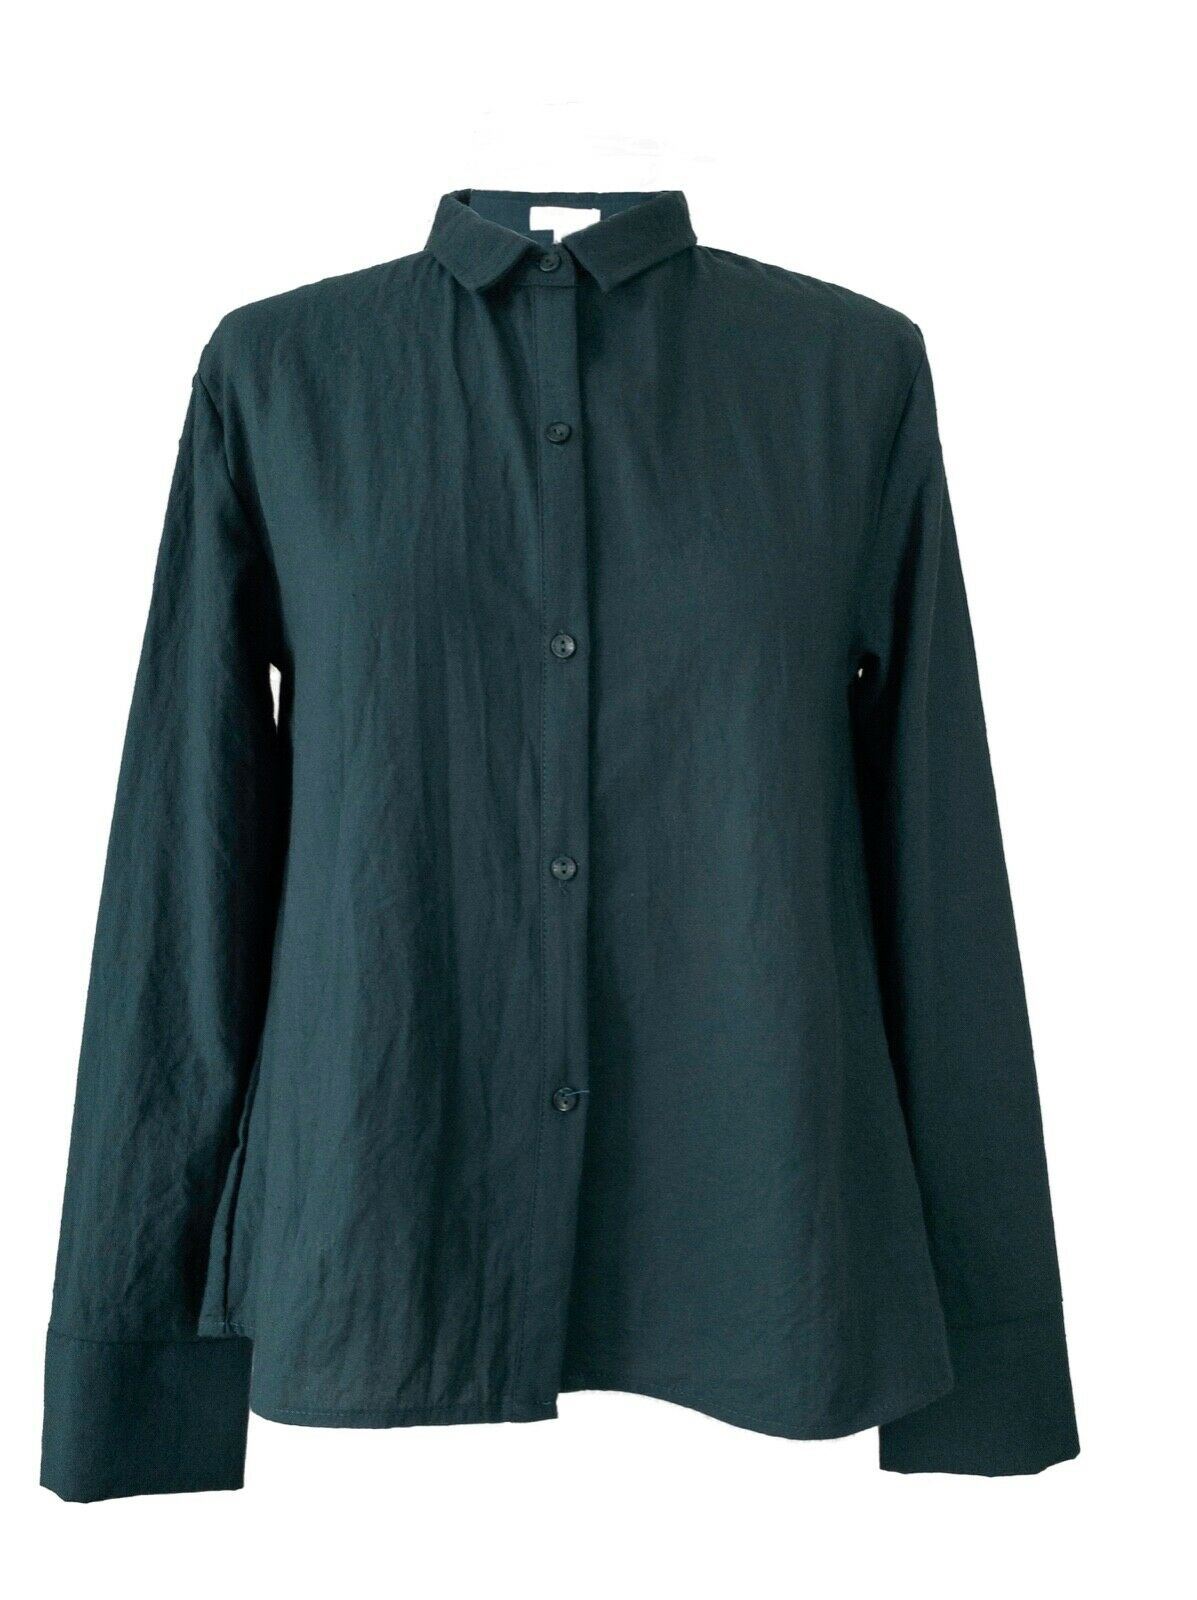 Grace & Mila Paris Lamber Shirt Pleated Back Available in Ecru or Green